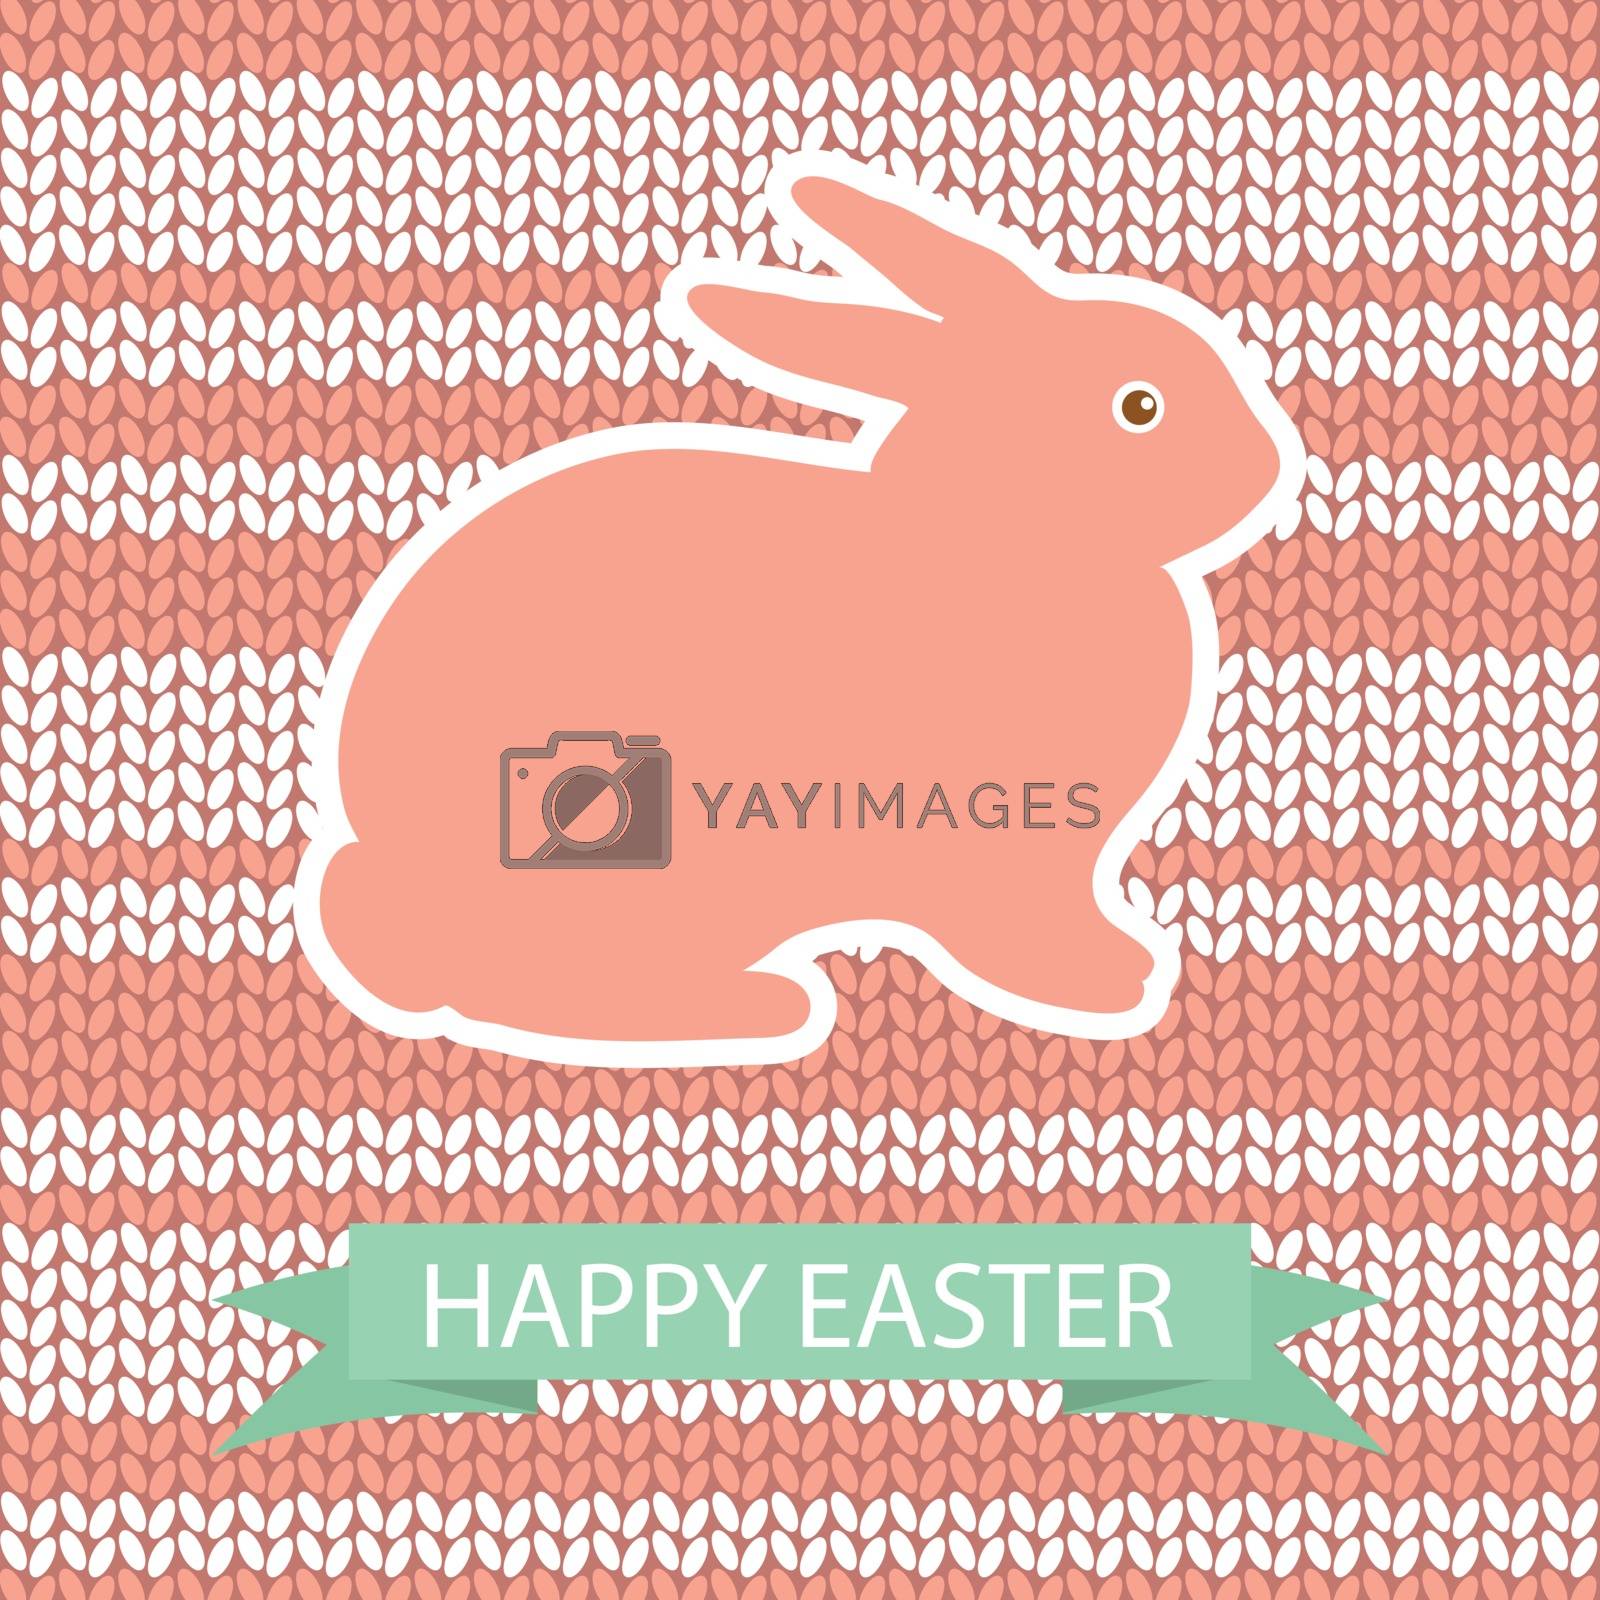 Royalty free image of Easter card with pink rabbit on wool knited background by mcherevan